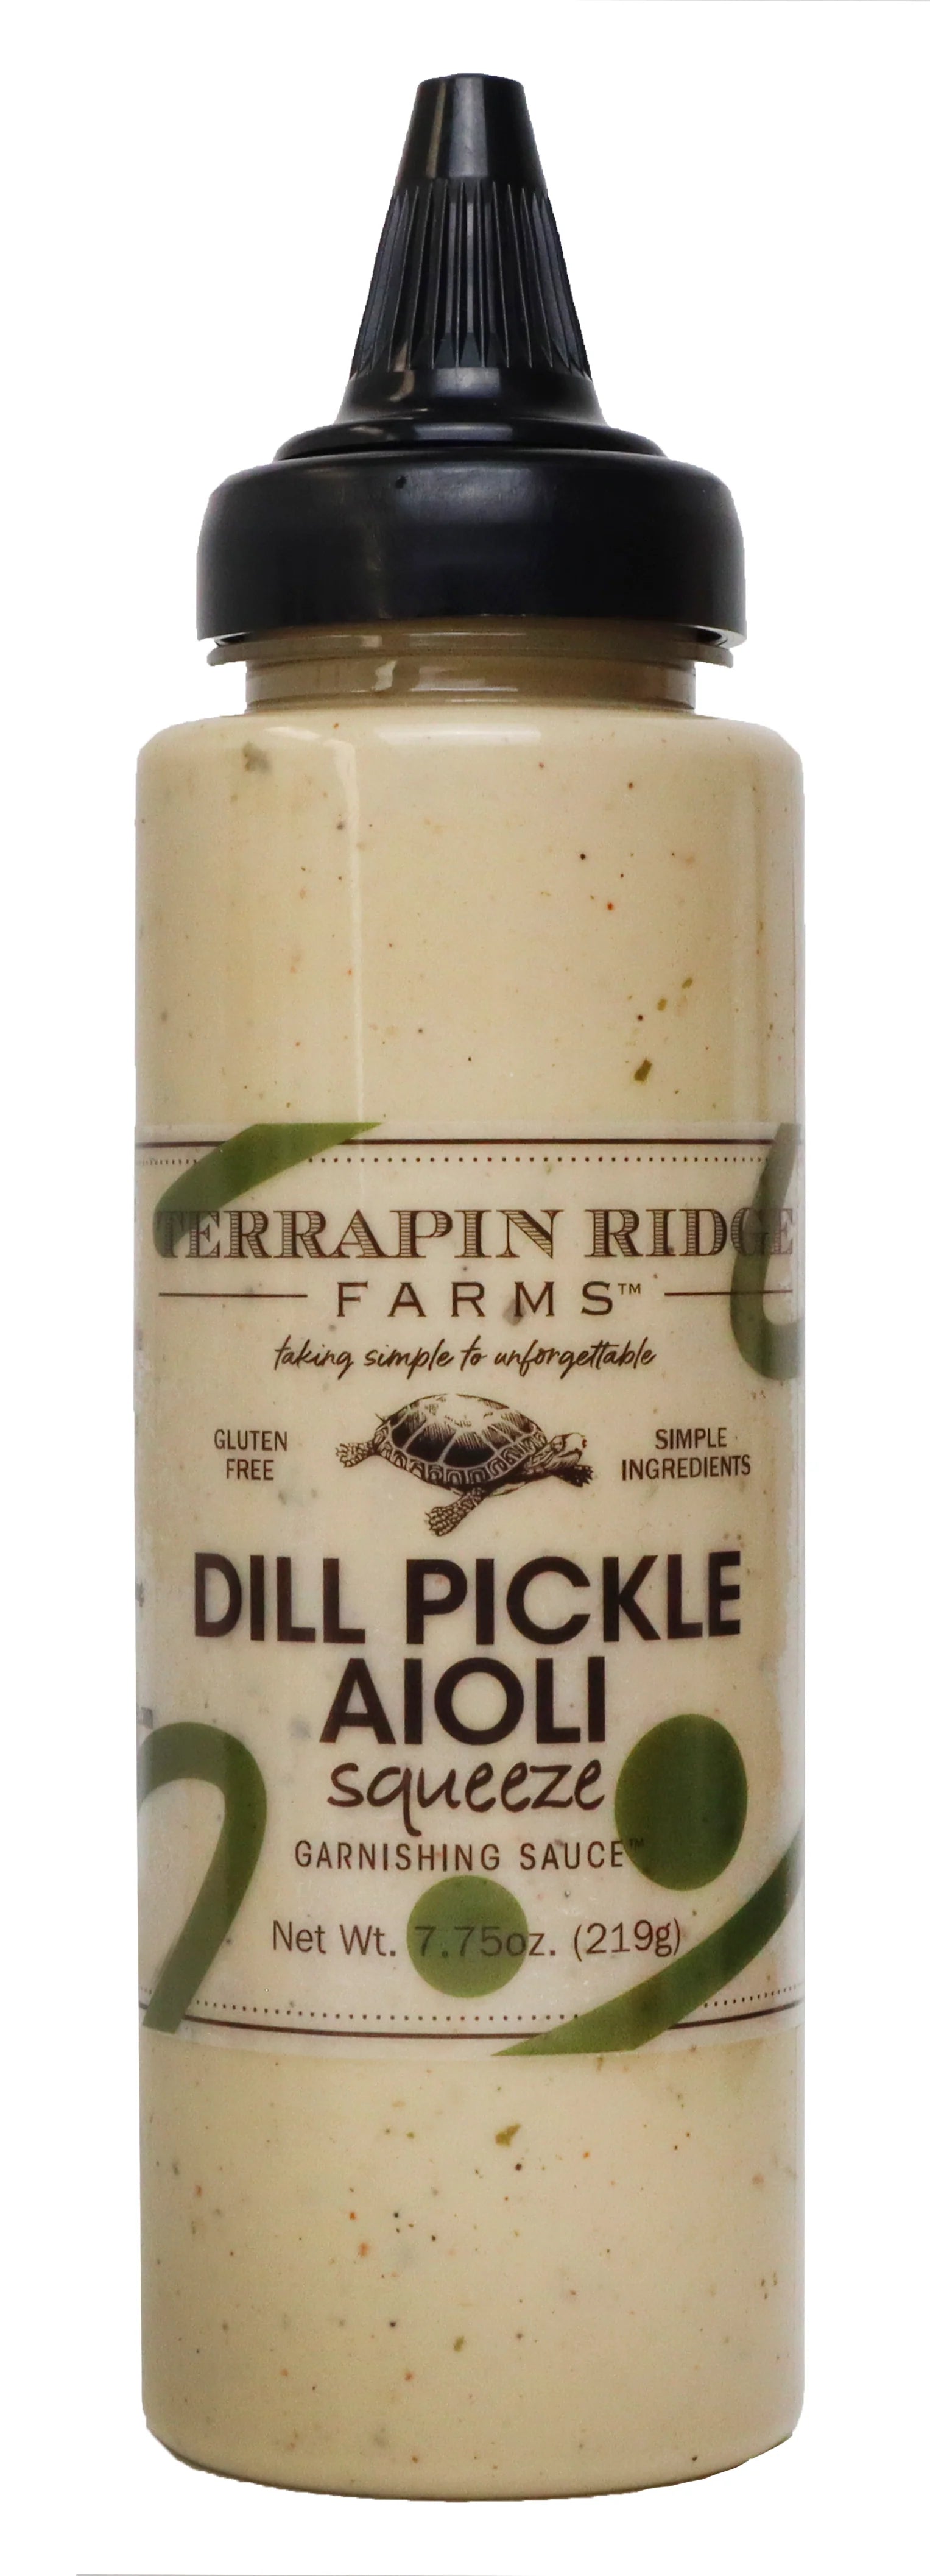 A green-labeled jar containing Terrapin Ridge Dill Pickle Aioli.